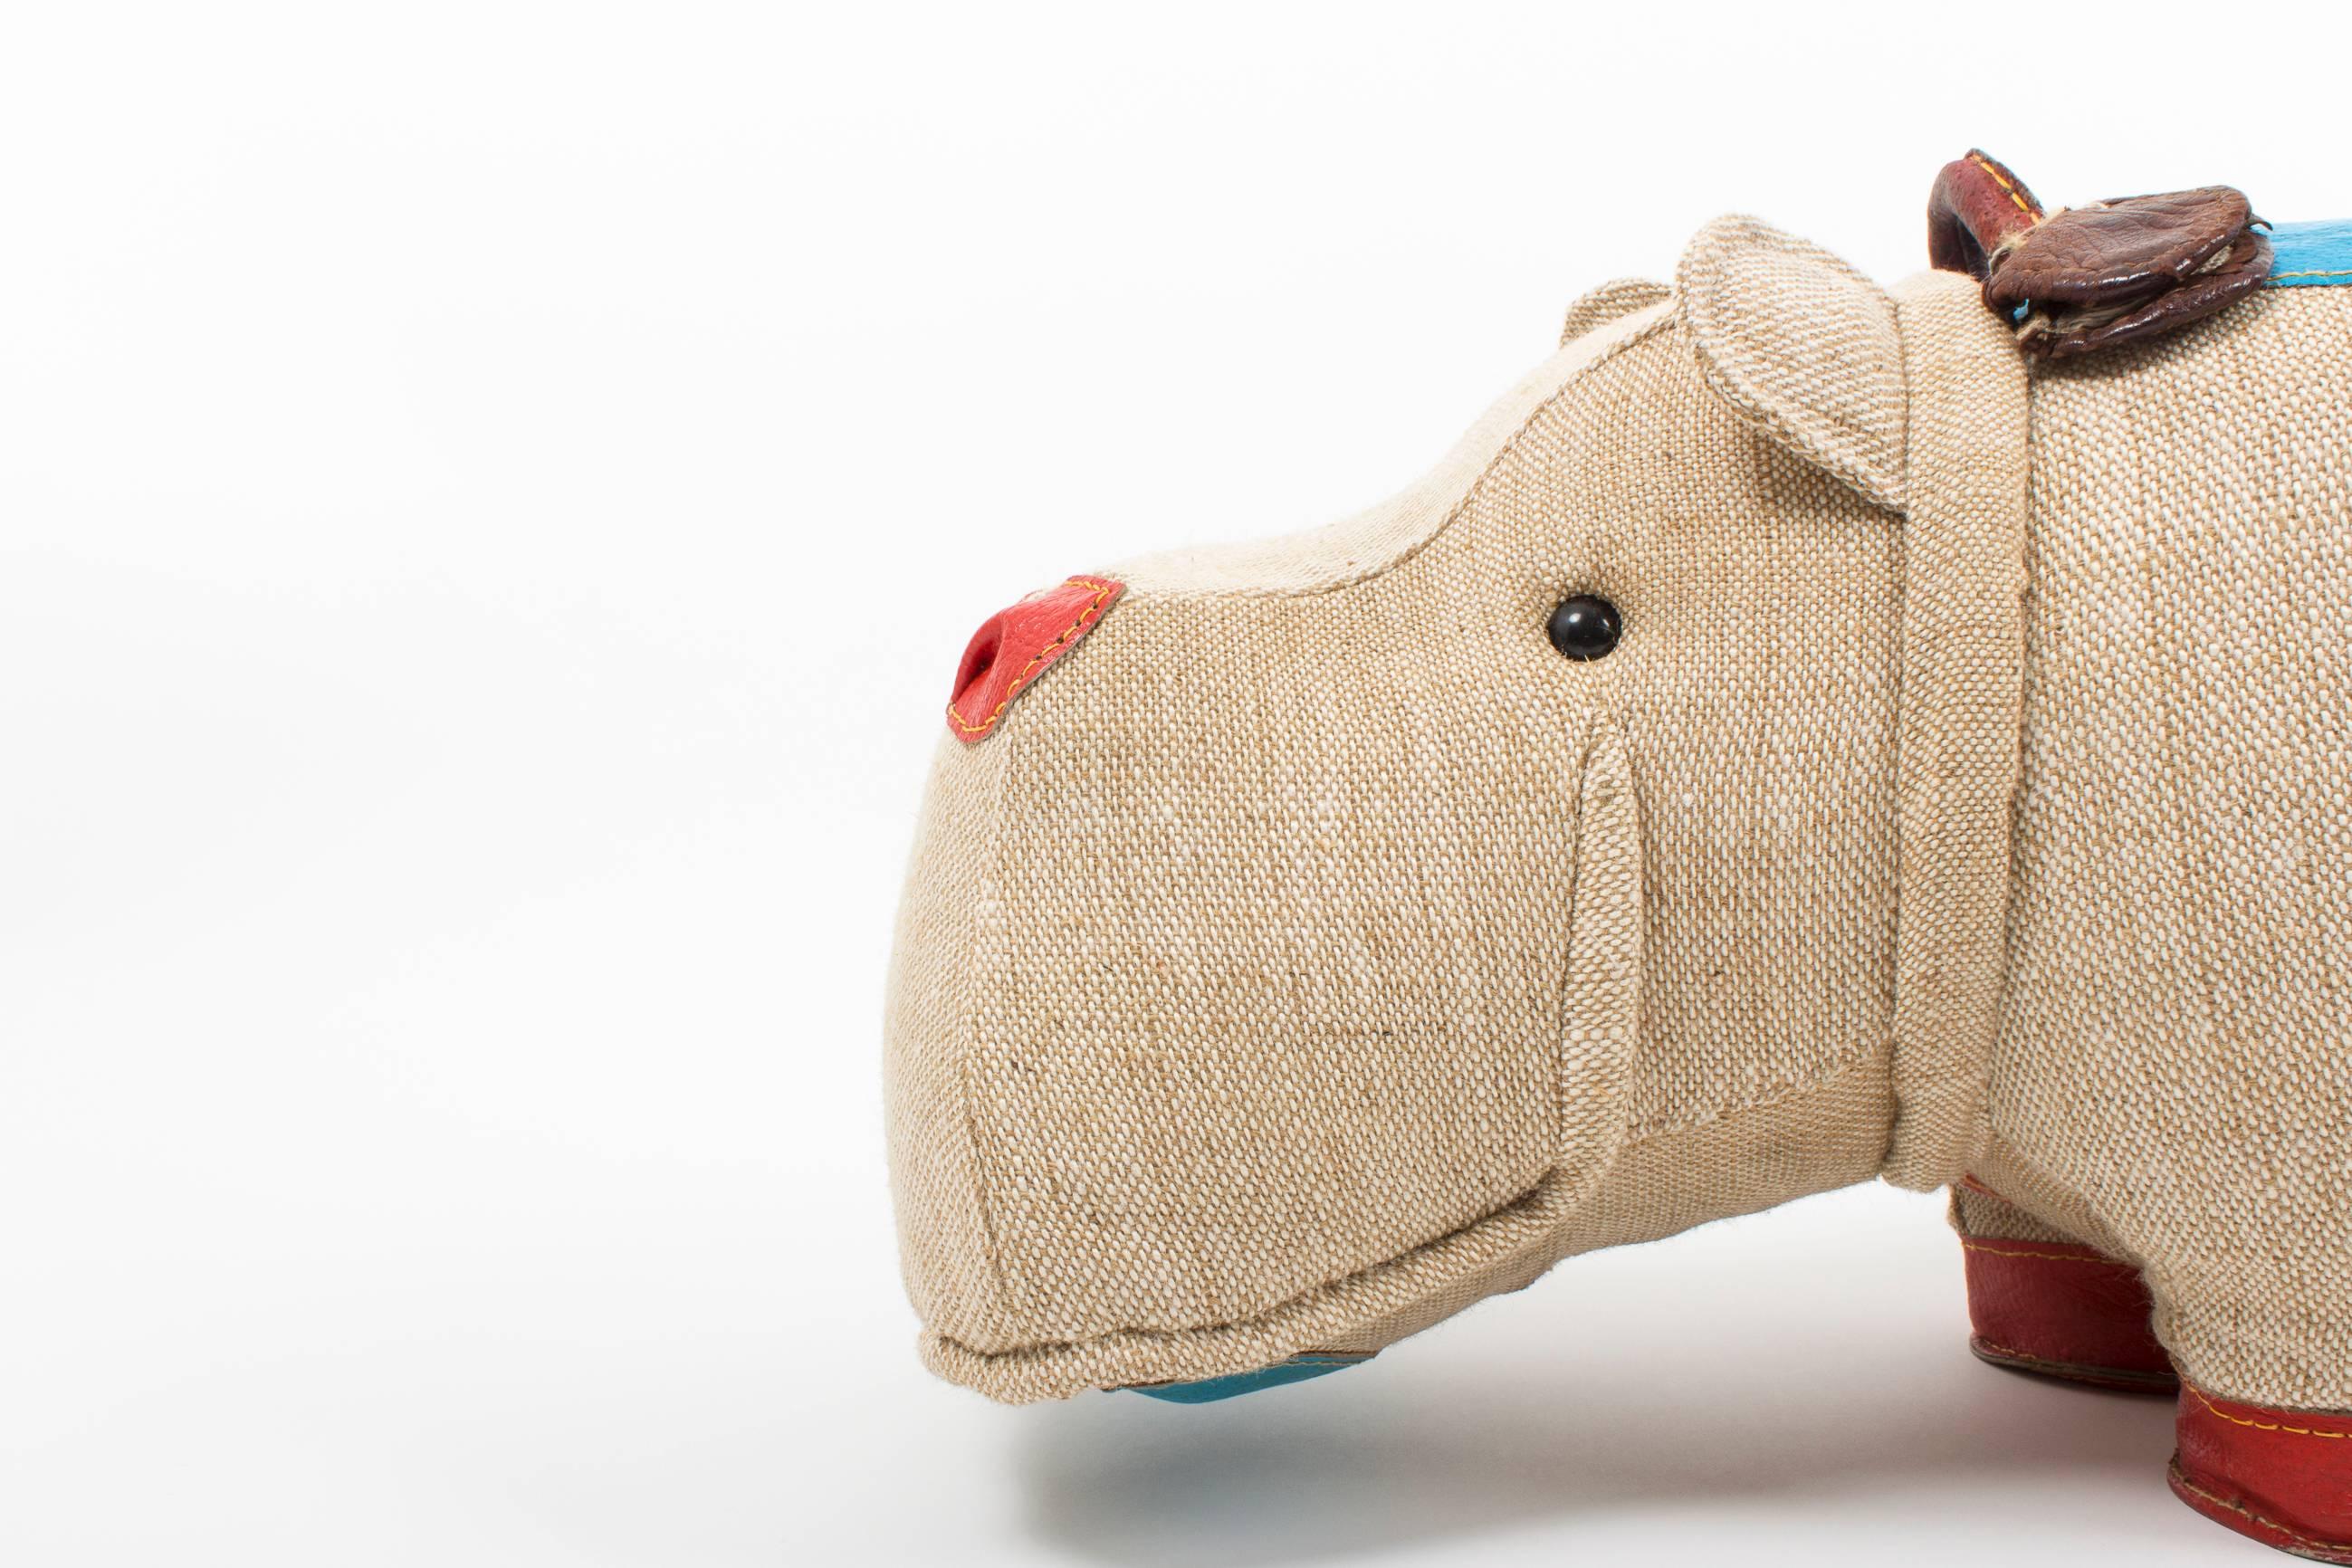 Other Signed 'Therapeutic Toy' Hippopotamus by Renate Müller, Designed in 1968